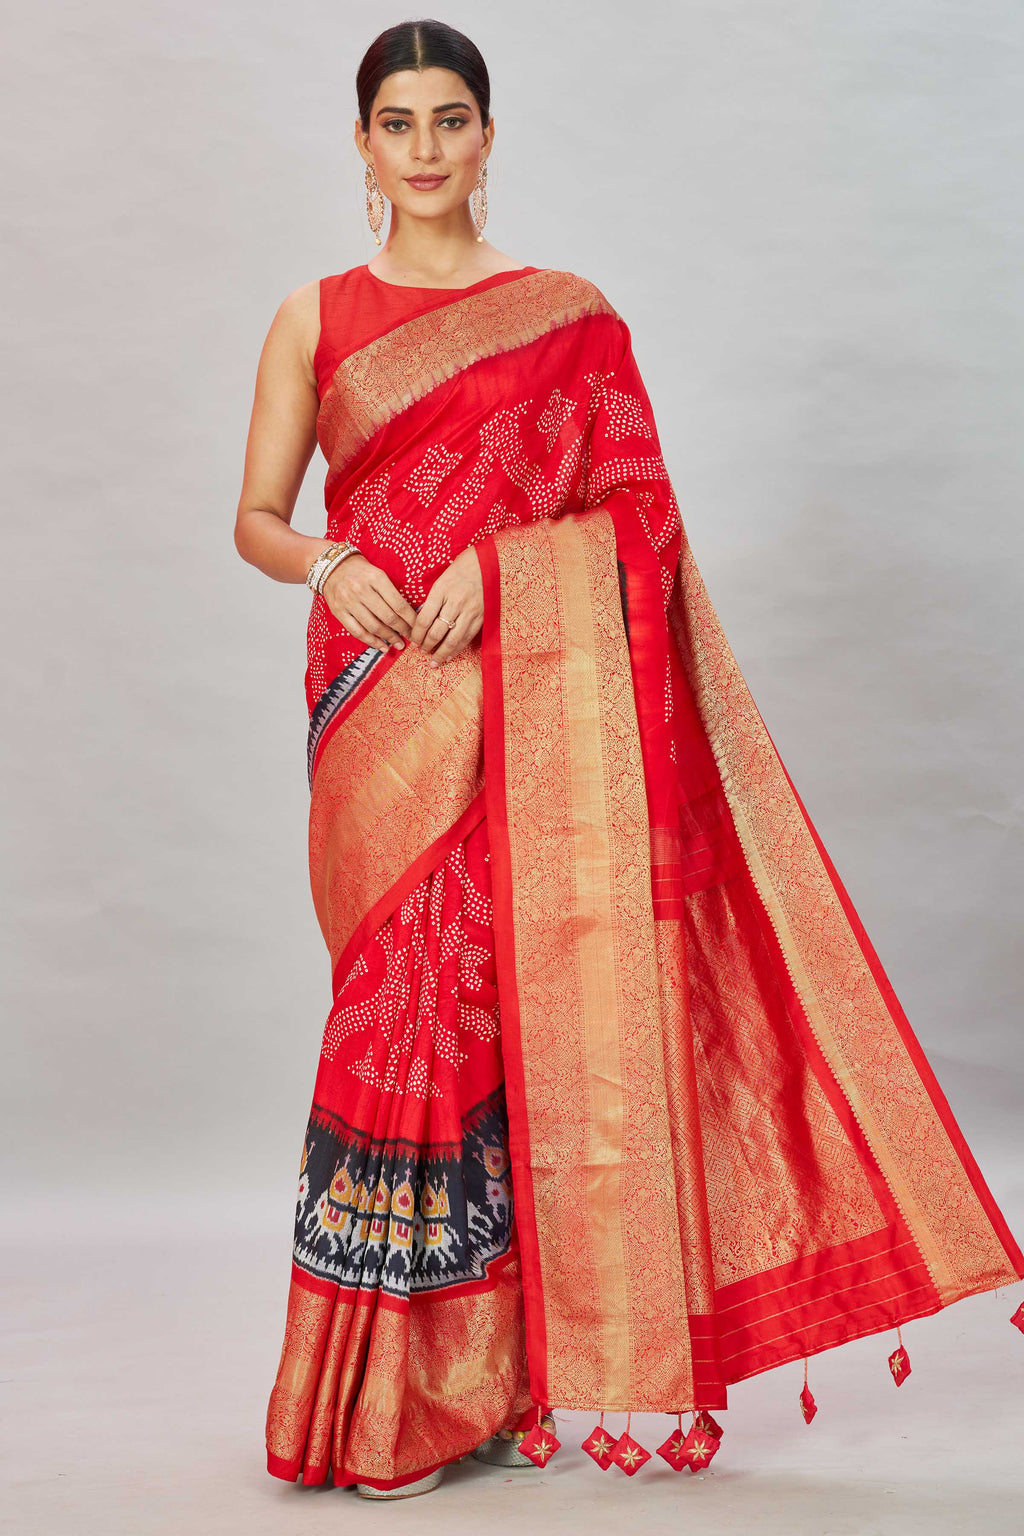 Buy red bandhej Kanjivaram silk saree online in USA with ikkat border. Look your best on festive occasions in latest designer sarees, pure silk sarees, Kanjivaram silk saris, handwoven saris, tussar silk sarees, embroidered saris from Pure Elegance Indian clothing store in USA.-full view